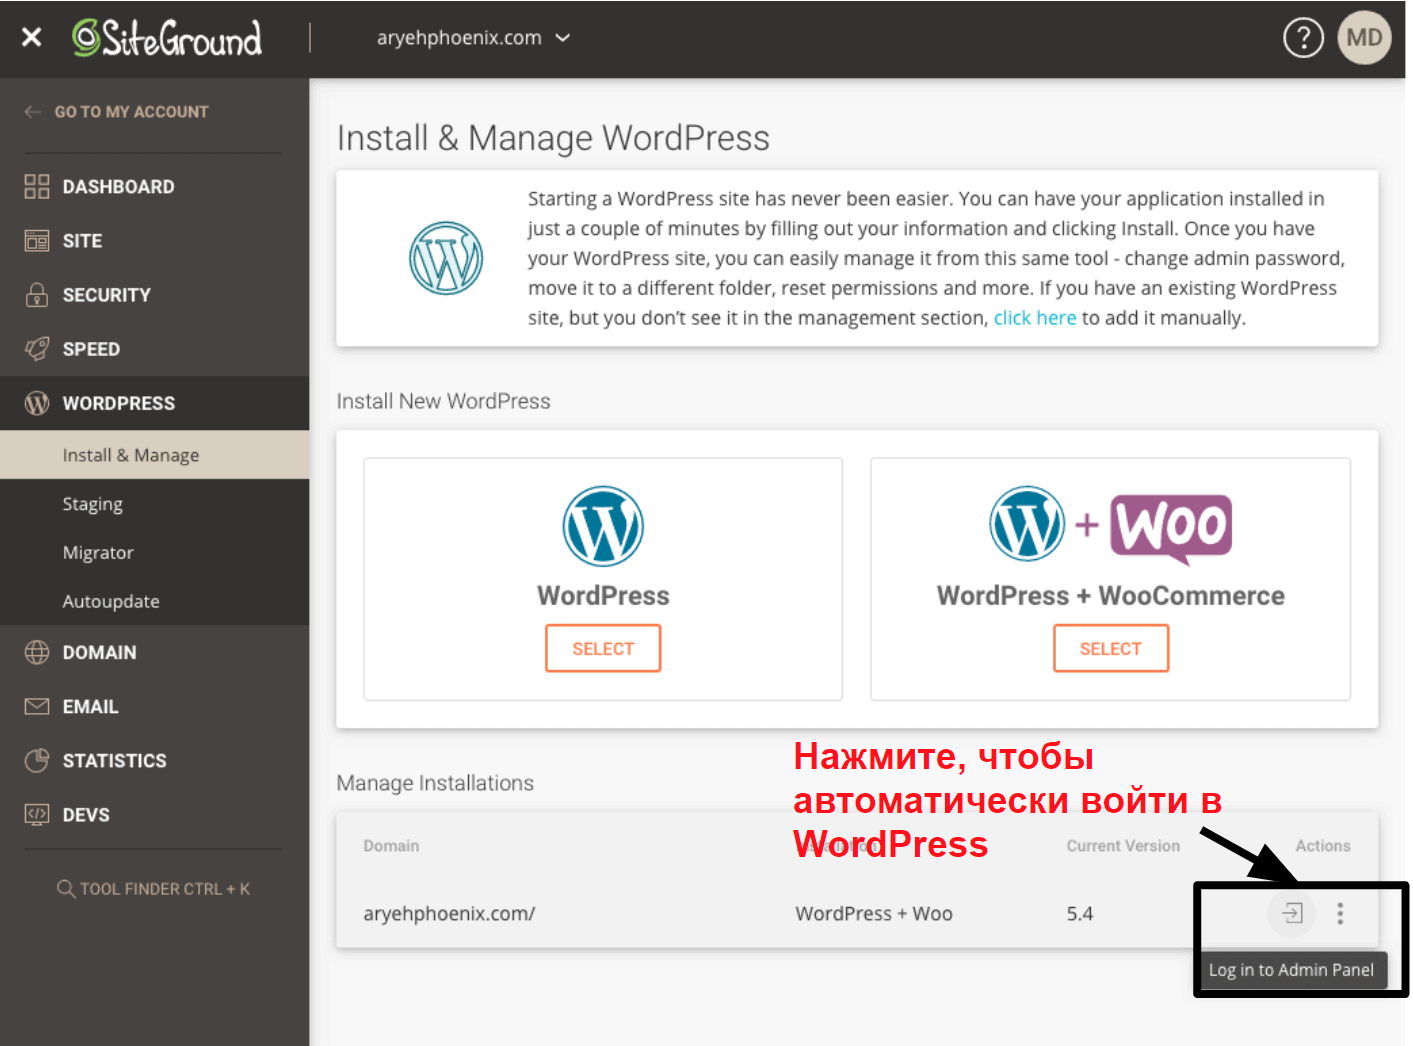 SiteGround offers a one click login option for your WordPress dashboard RU15